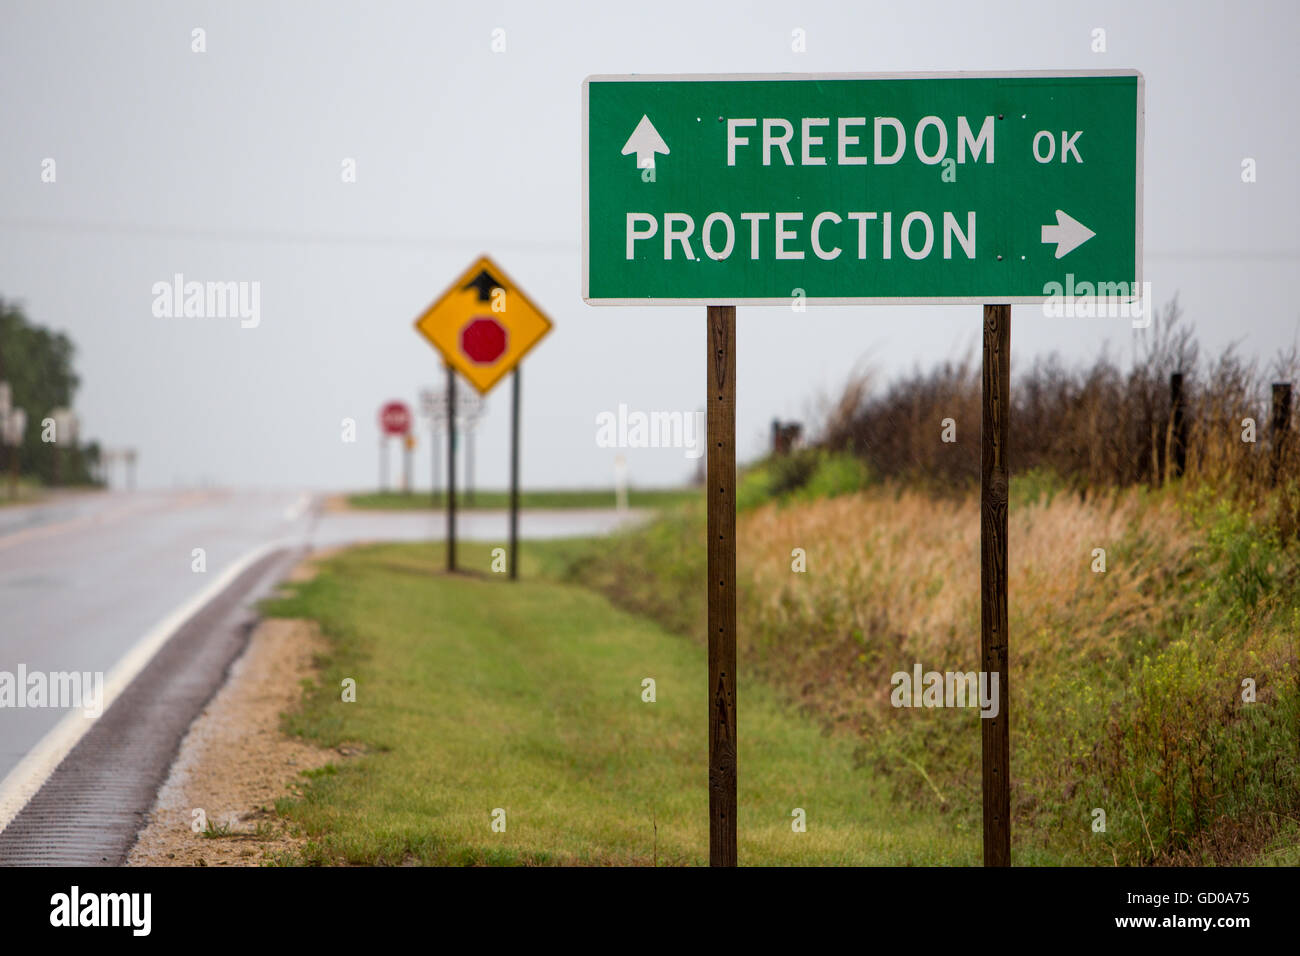 A sign pointing to Freedom or Protection, Oklahoma. Stock Photo